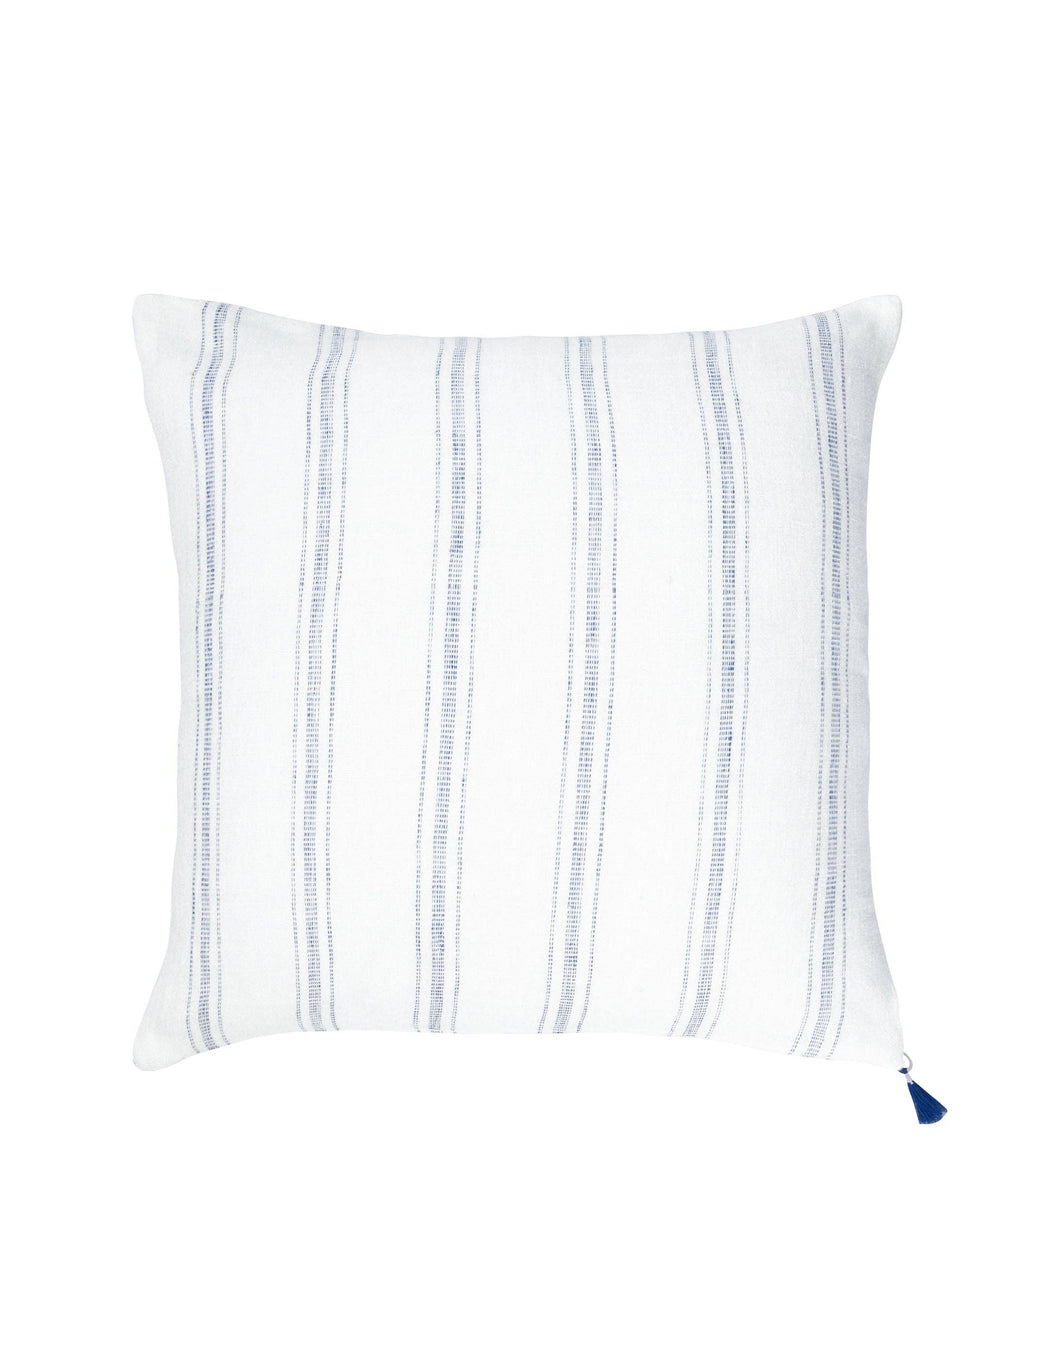 White with Blue Stripes So Soft Linen Pillow - 20x20”